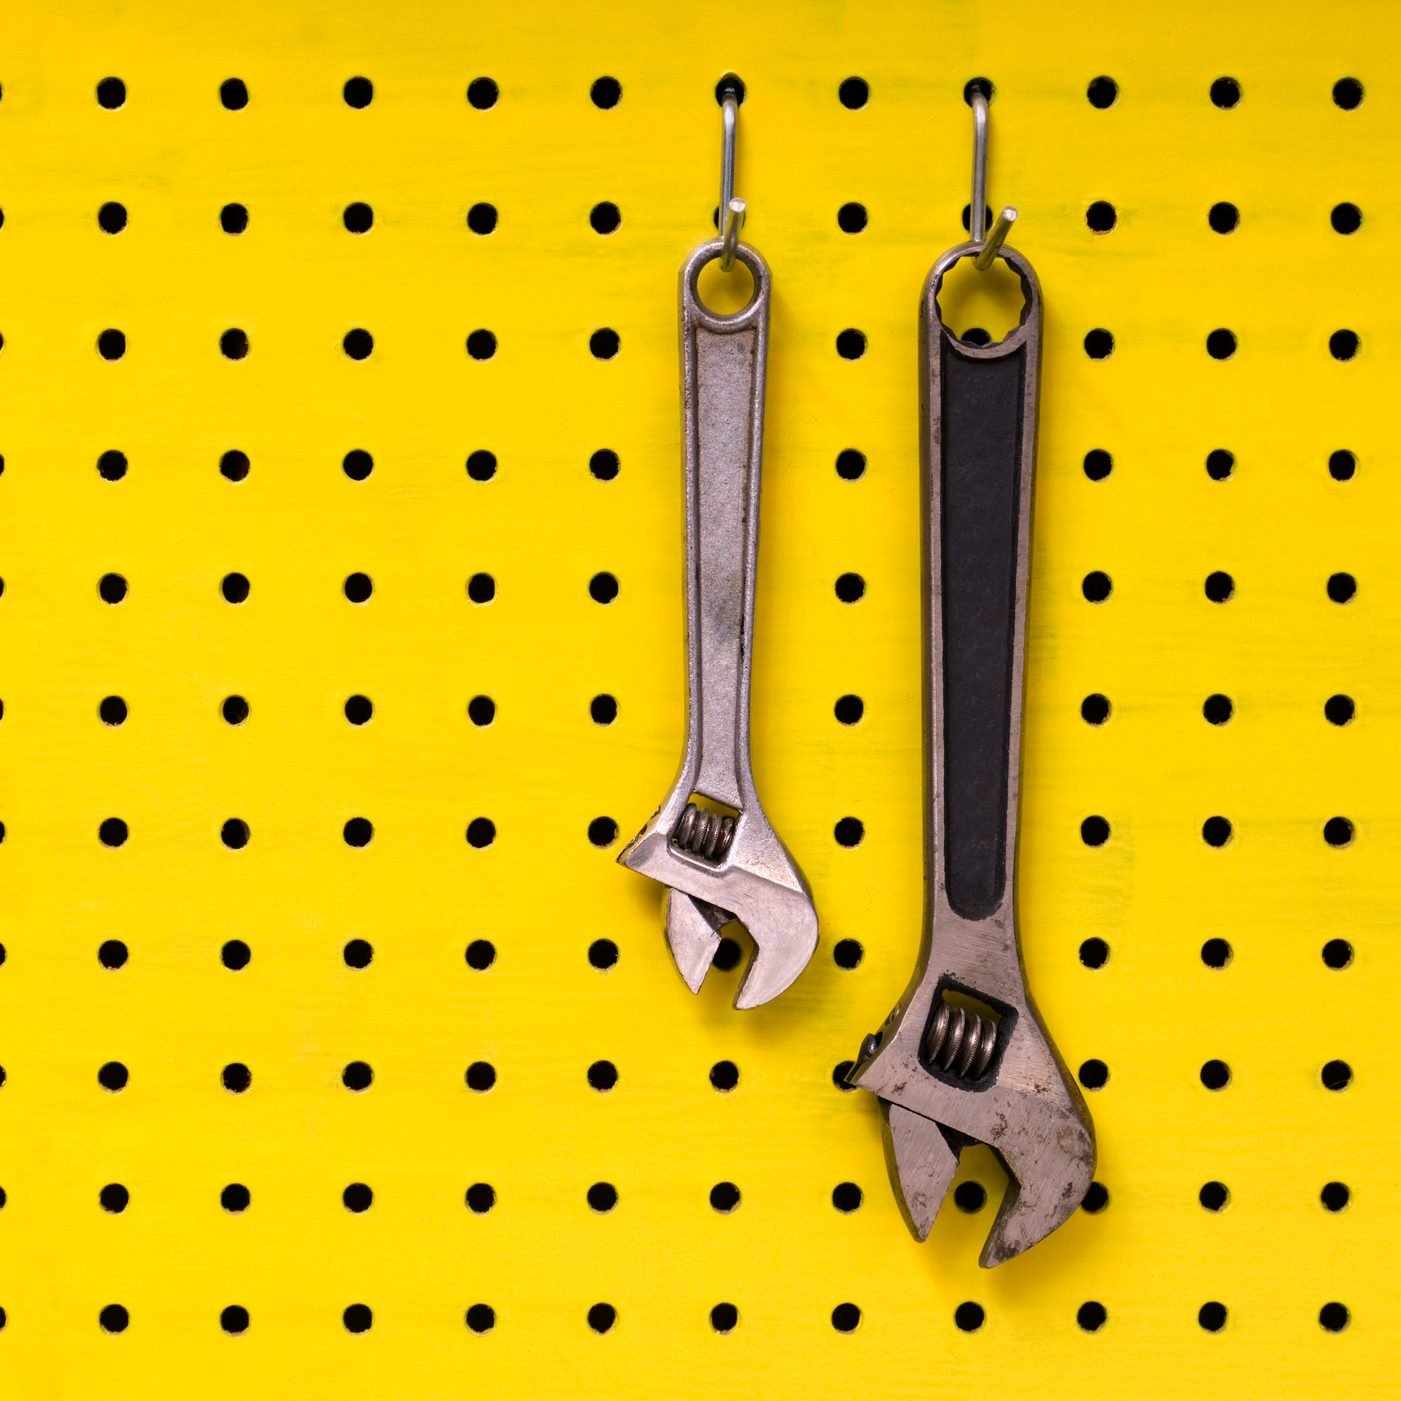 Two wrenches hang from hooks on yellow pegboard